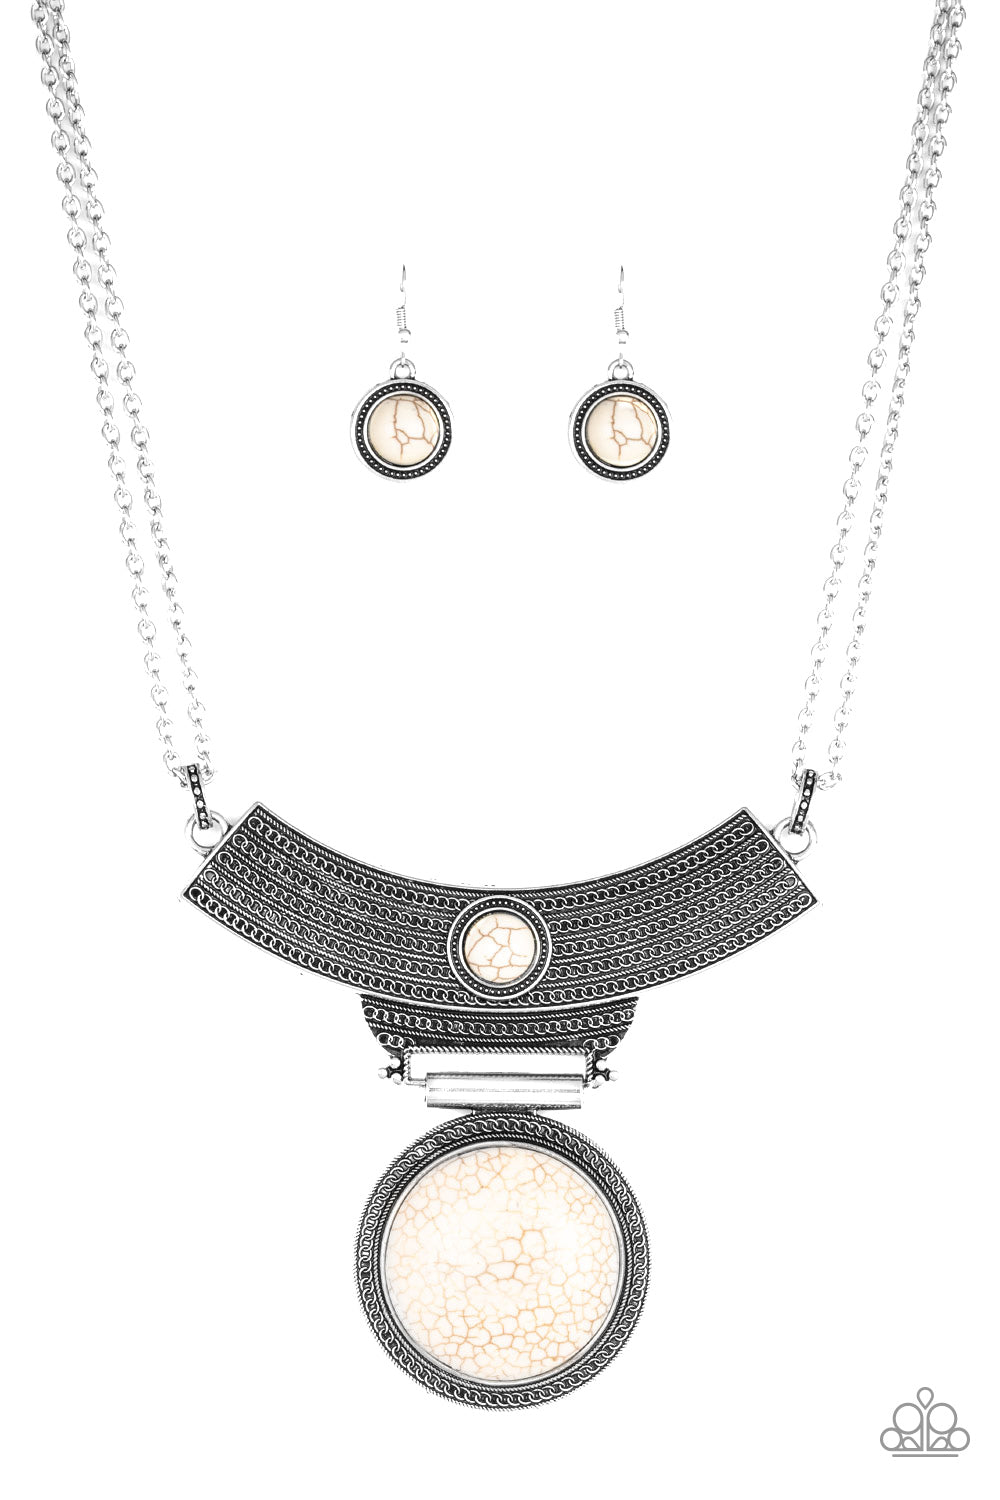 An antiqued silver plate, adorned in rippling circular textures, swings from the bottom of a pair of doubled silver chains. The ornate plate gives way to a dramatic white stone pendant bordered by tribal inspired patterns for a statement-making finish. Features an adjustable clasp closure.